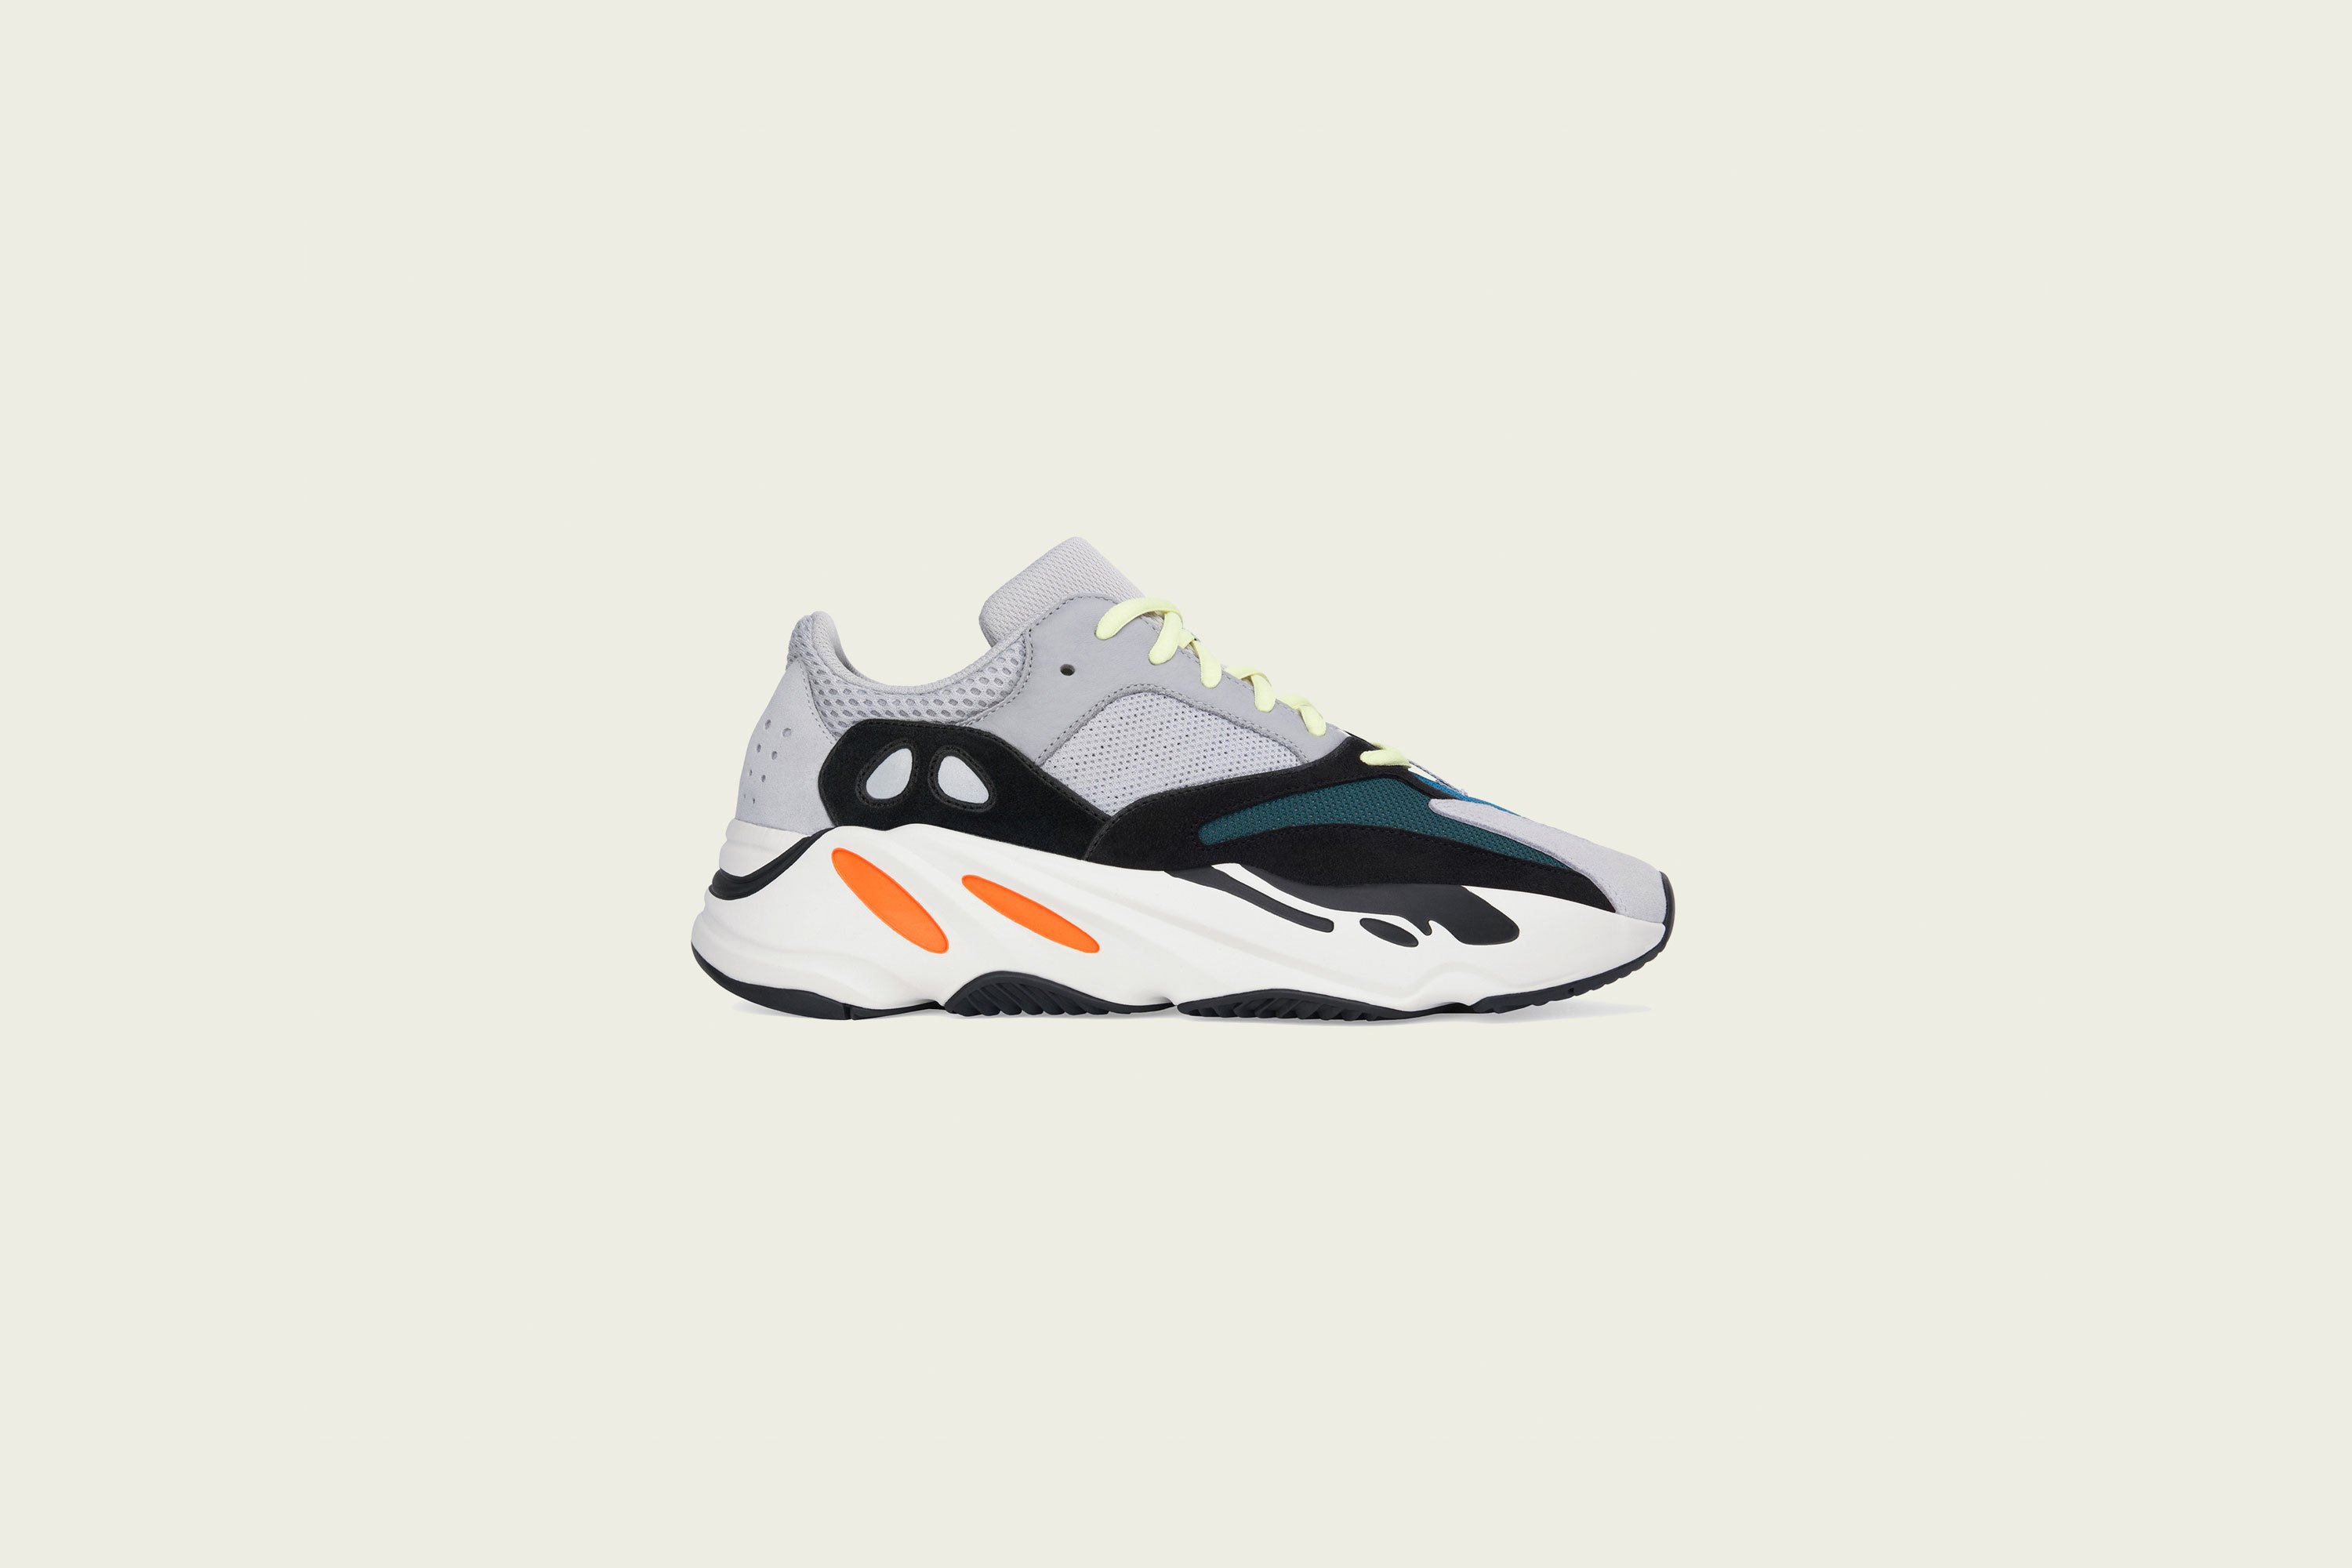 adidas - Yeezy Boost 700 - Wave Runner - Up There